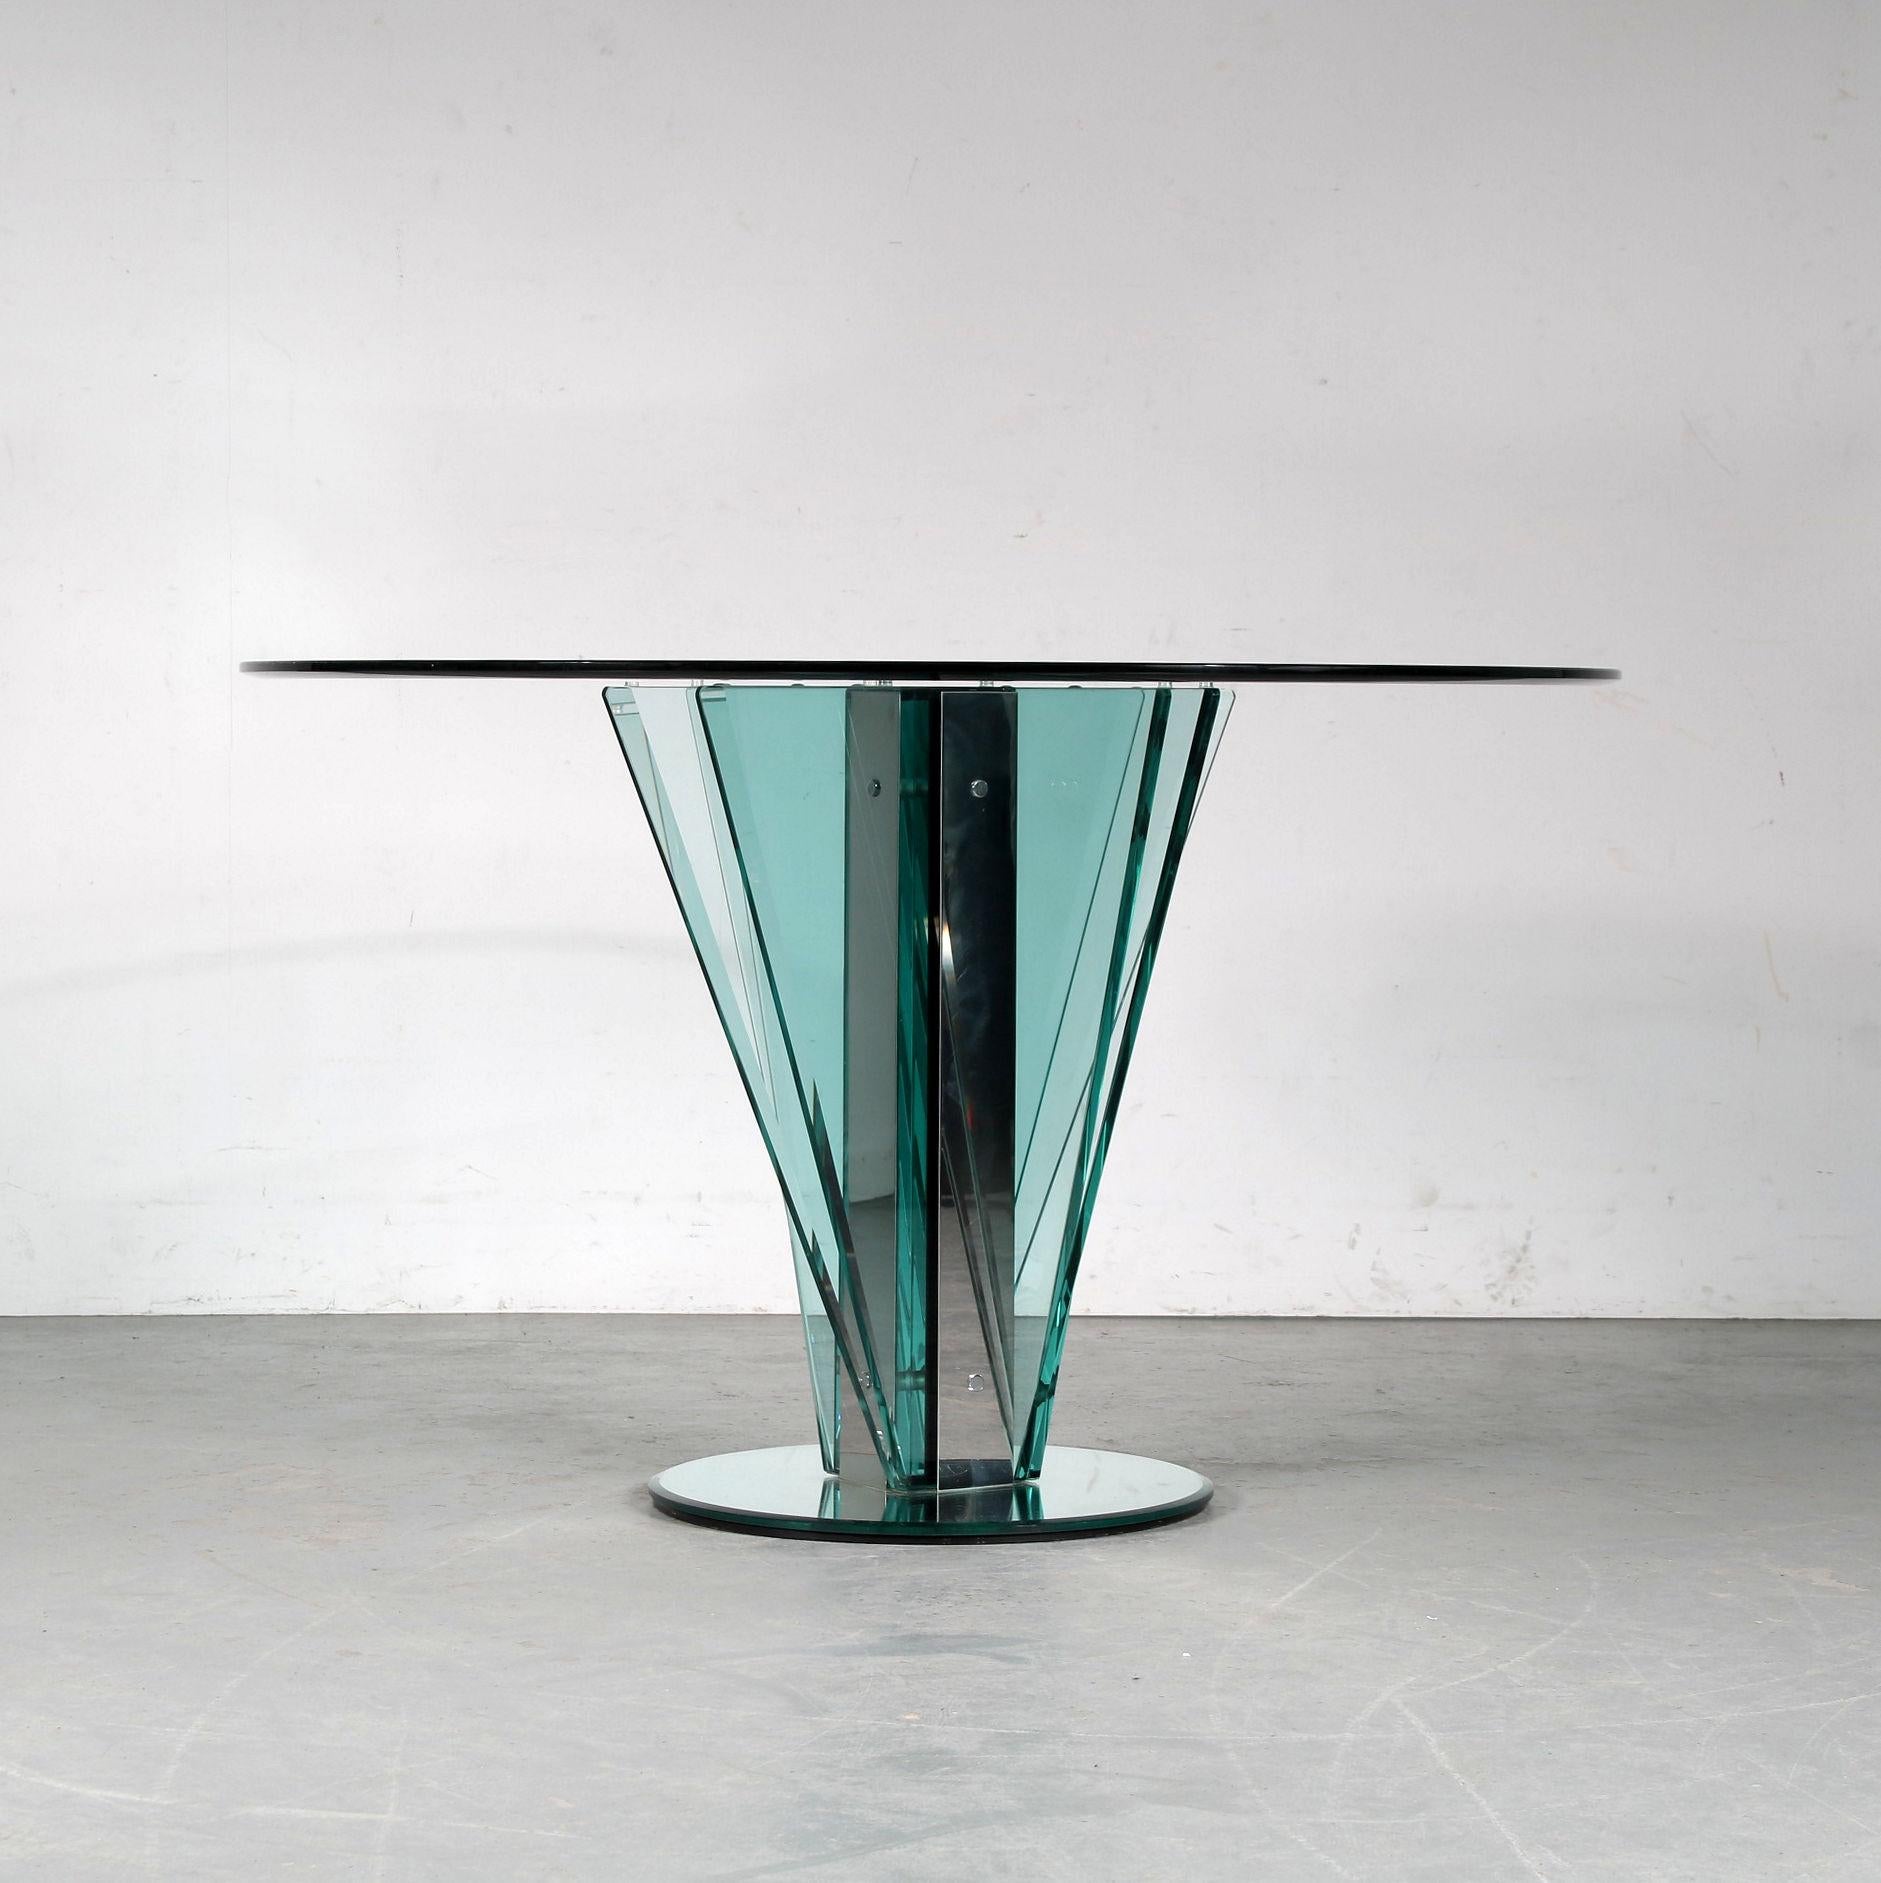 An outstanding dining table attributed to Pietro Chiesa for Fontana Arte, manufactured in Italy around 1970.

This amazing piece is made of high quality clear Nile glass, giving it an impressive style and unique appearance. The several rectangle /